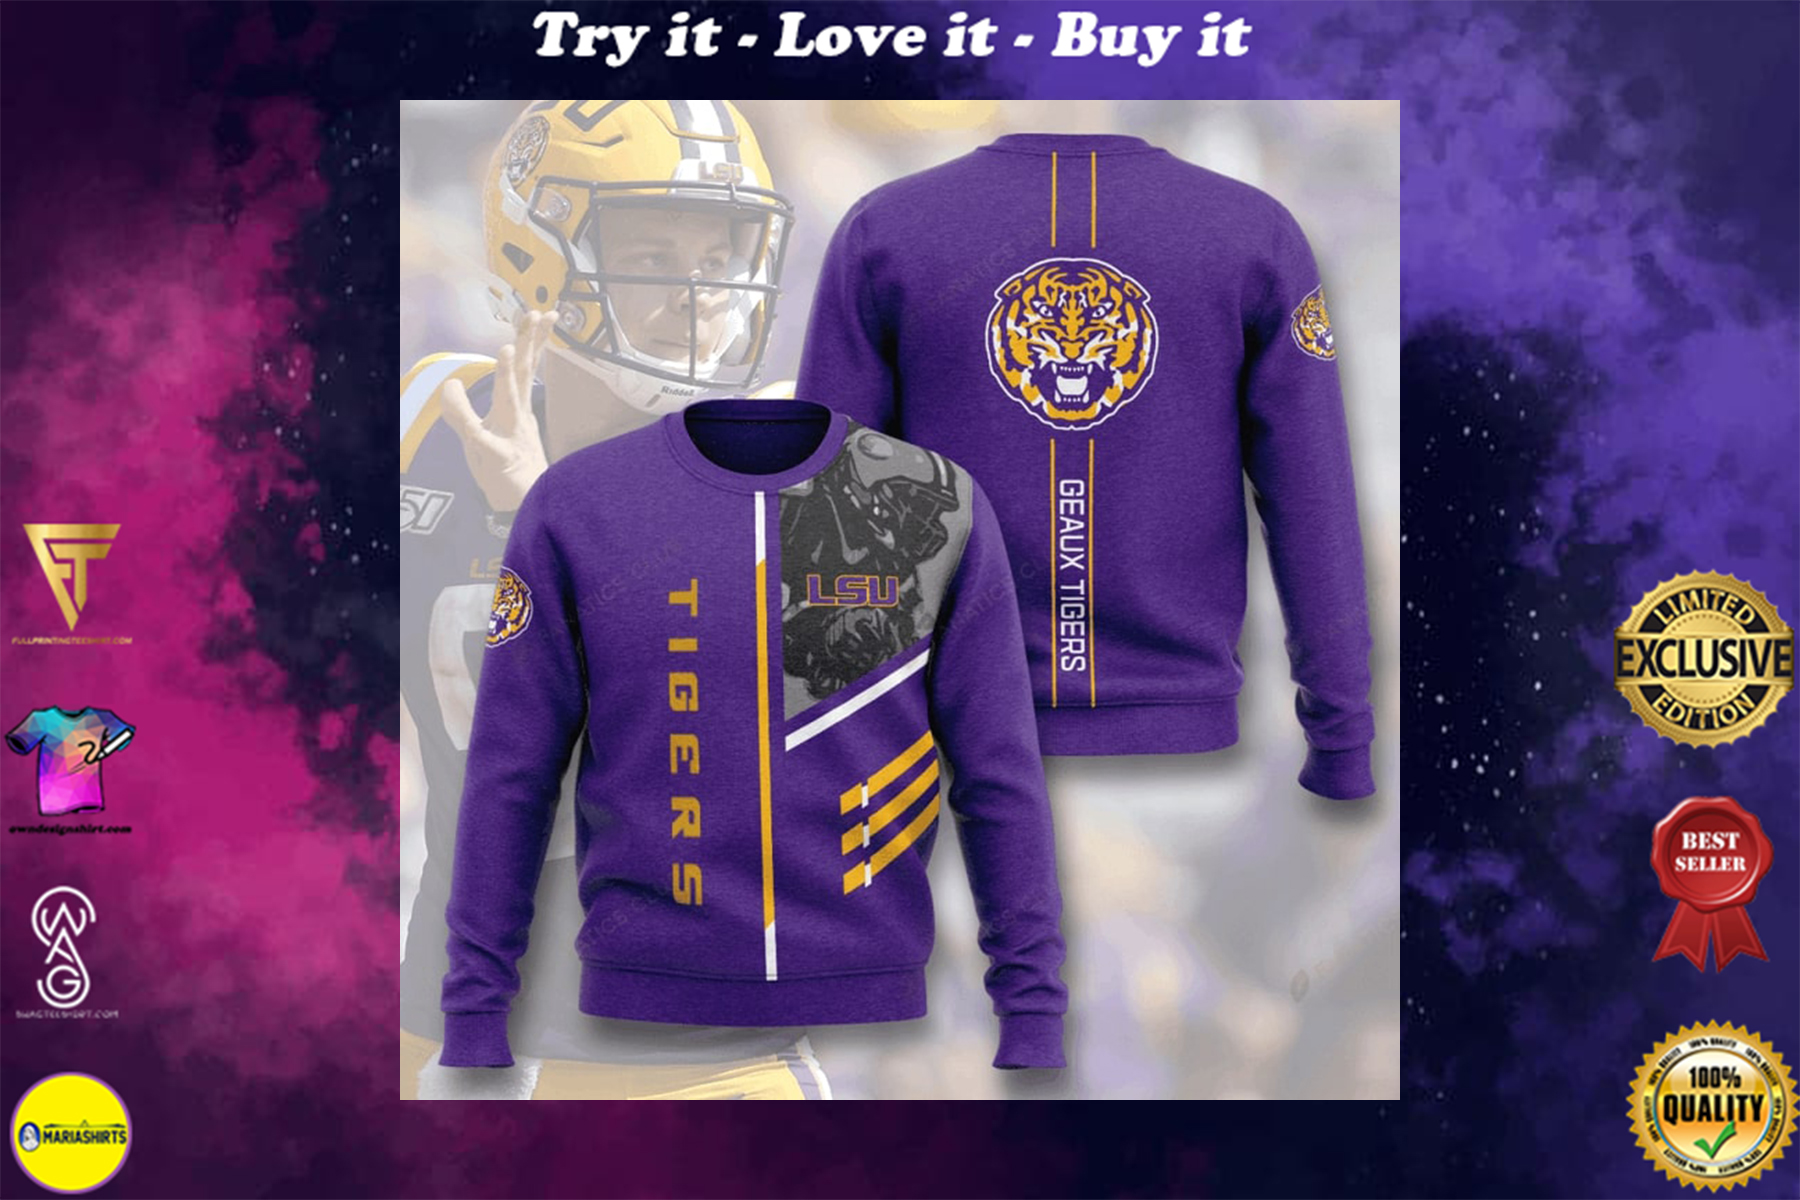 [special edition] lsu tigers football geaux tigers full printing ugly sweater – maria